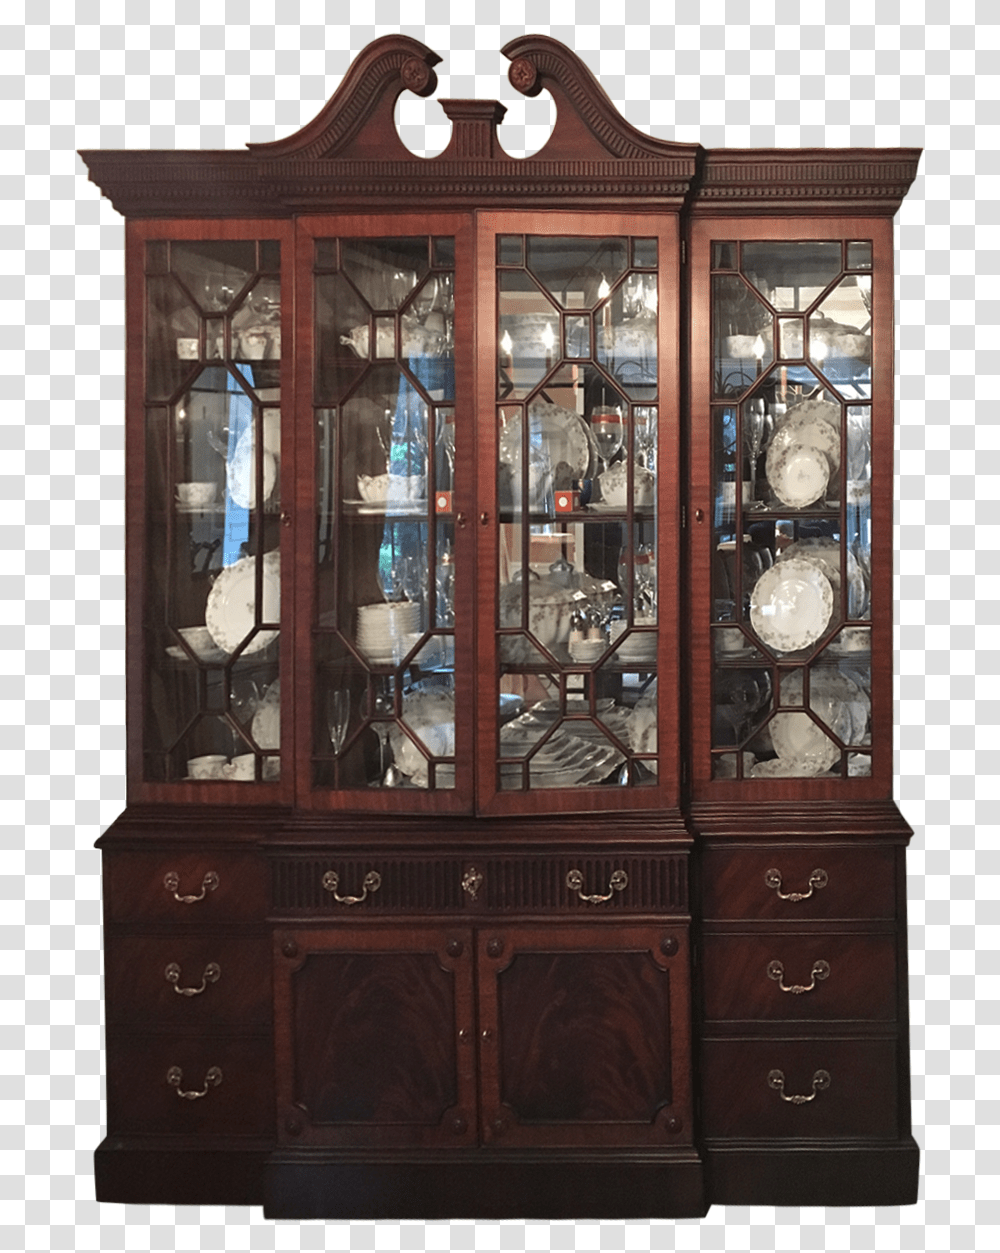 China Cabinet Hd China Cabinet, Furniture, Door, Clock Tower, Architecture Transparent Png